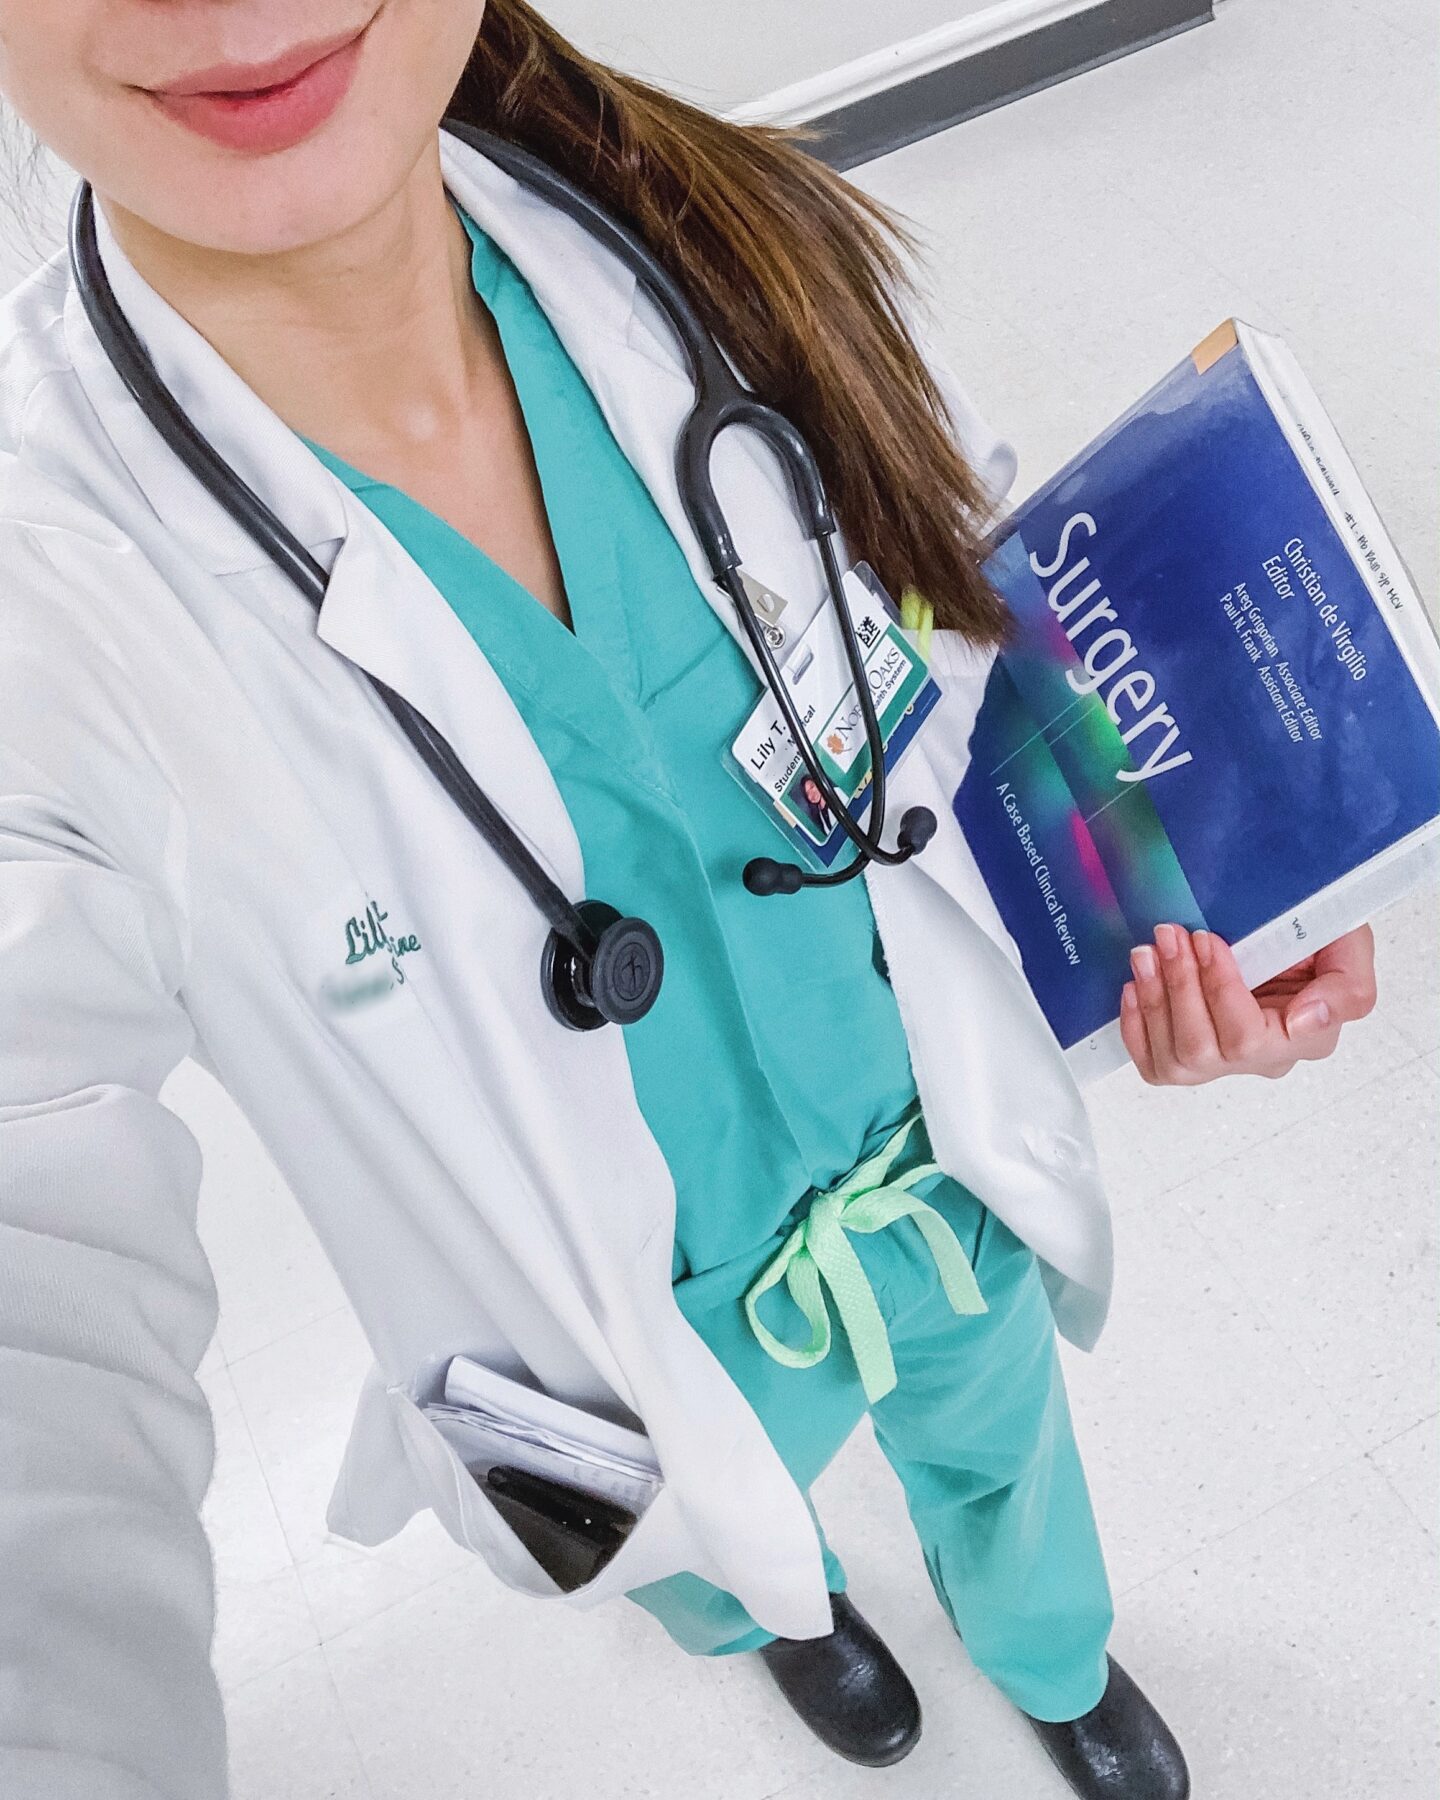 5 Apps You Need to Download for Your Clinical Rotations